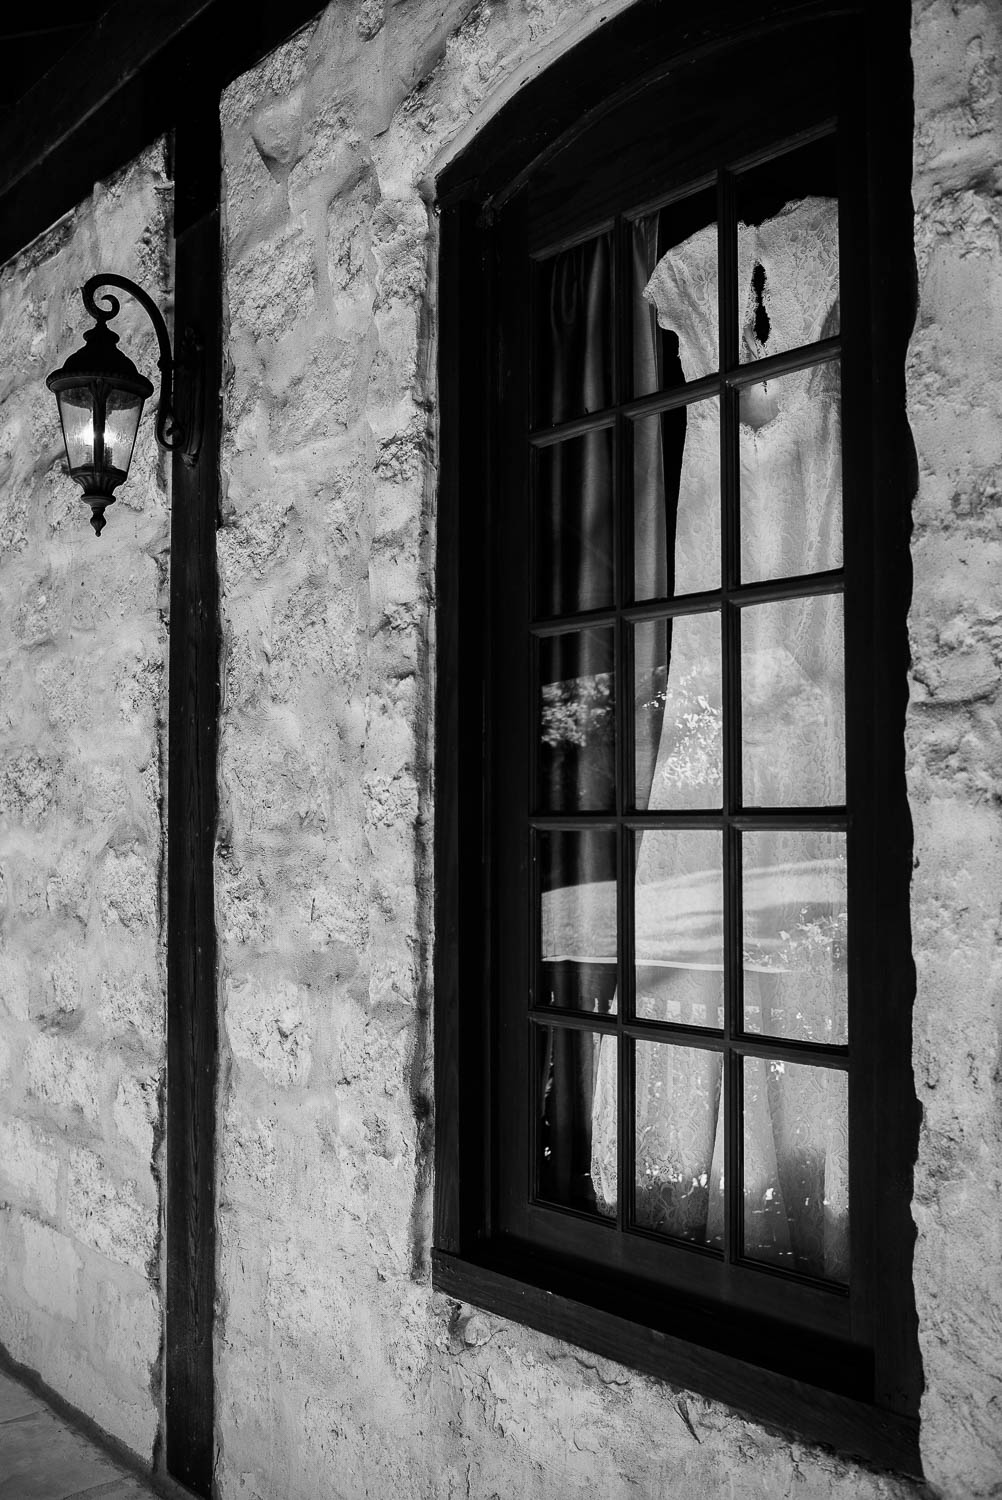 Wedding dress is shown hanging inside window at Pecan Springs Houston Texas photo by Philip Thomas Photography